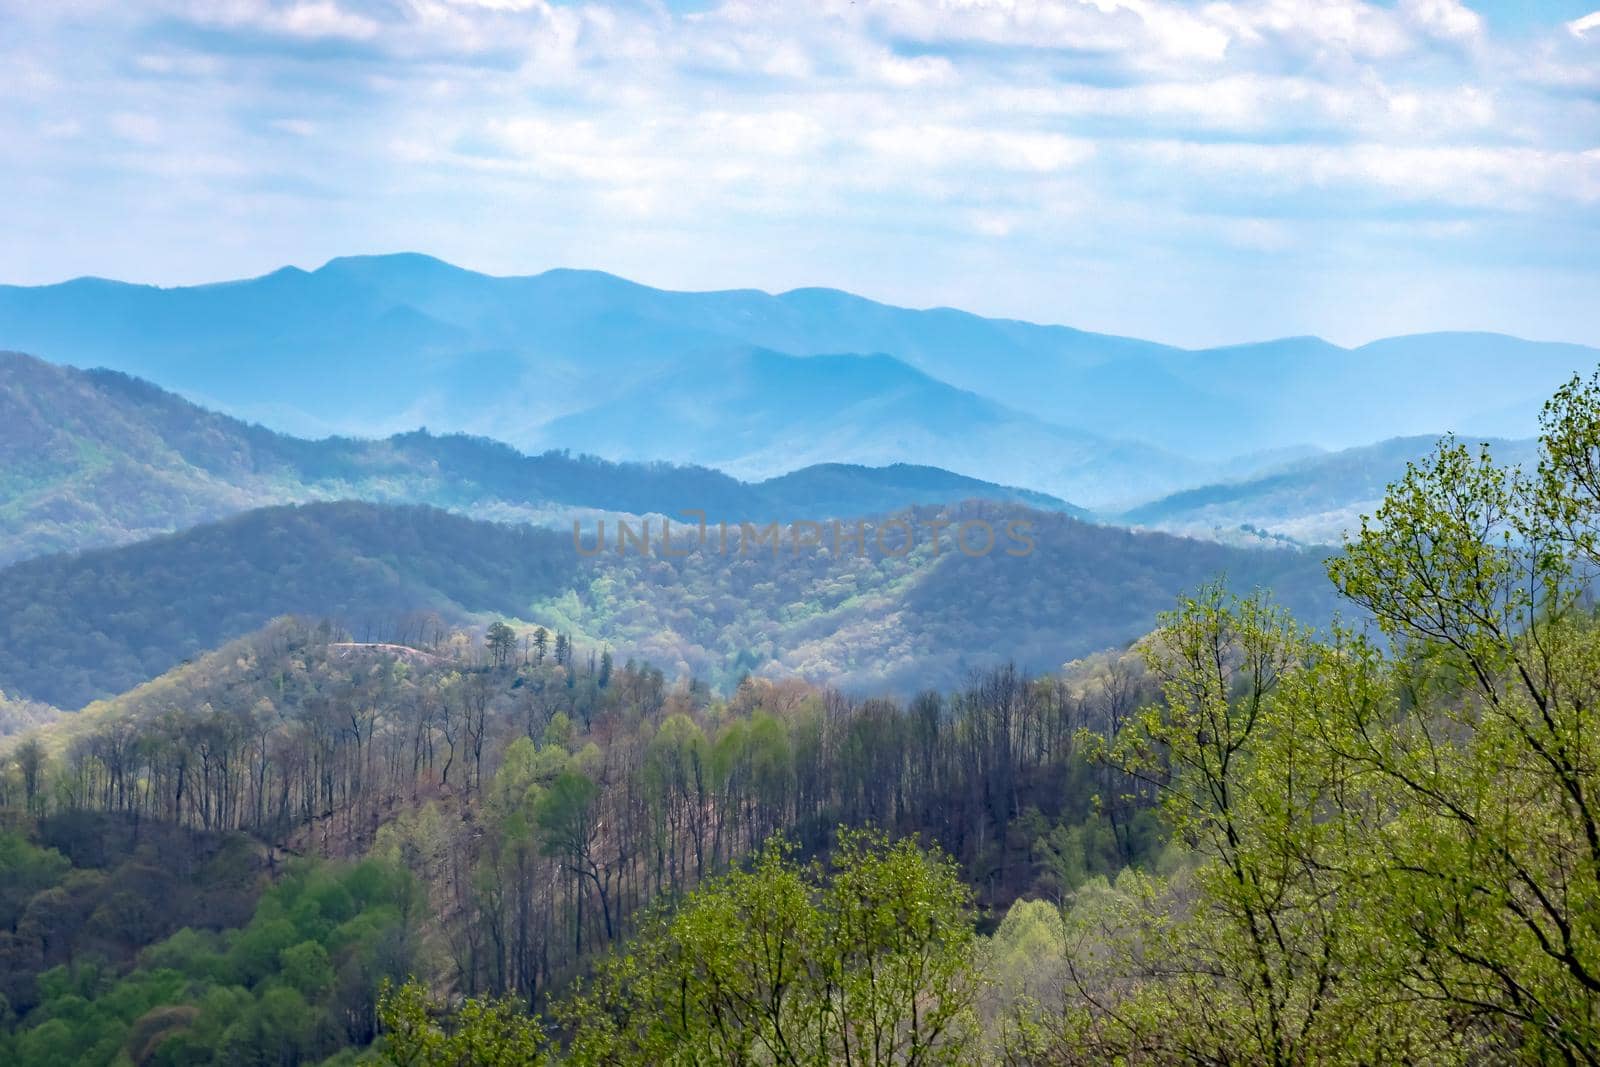 Landscape scenic views at pisgah national forest by digidreamgrafix